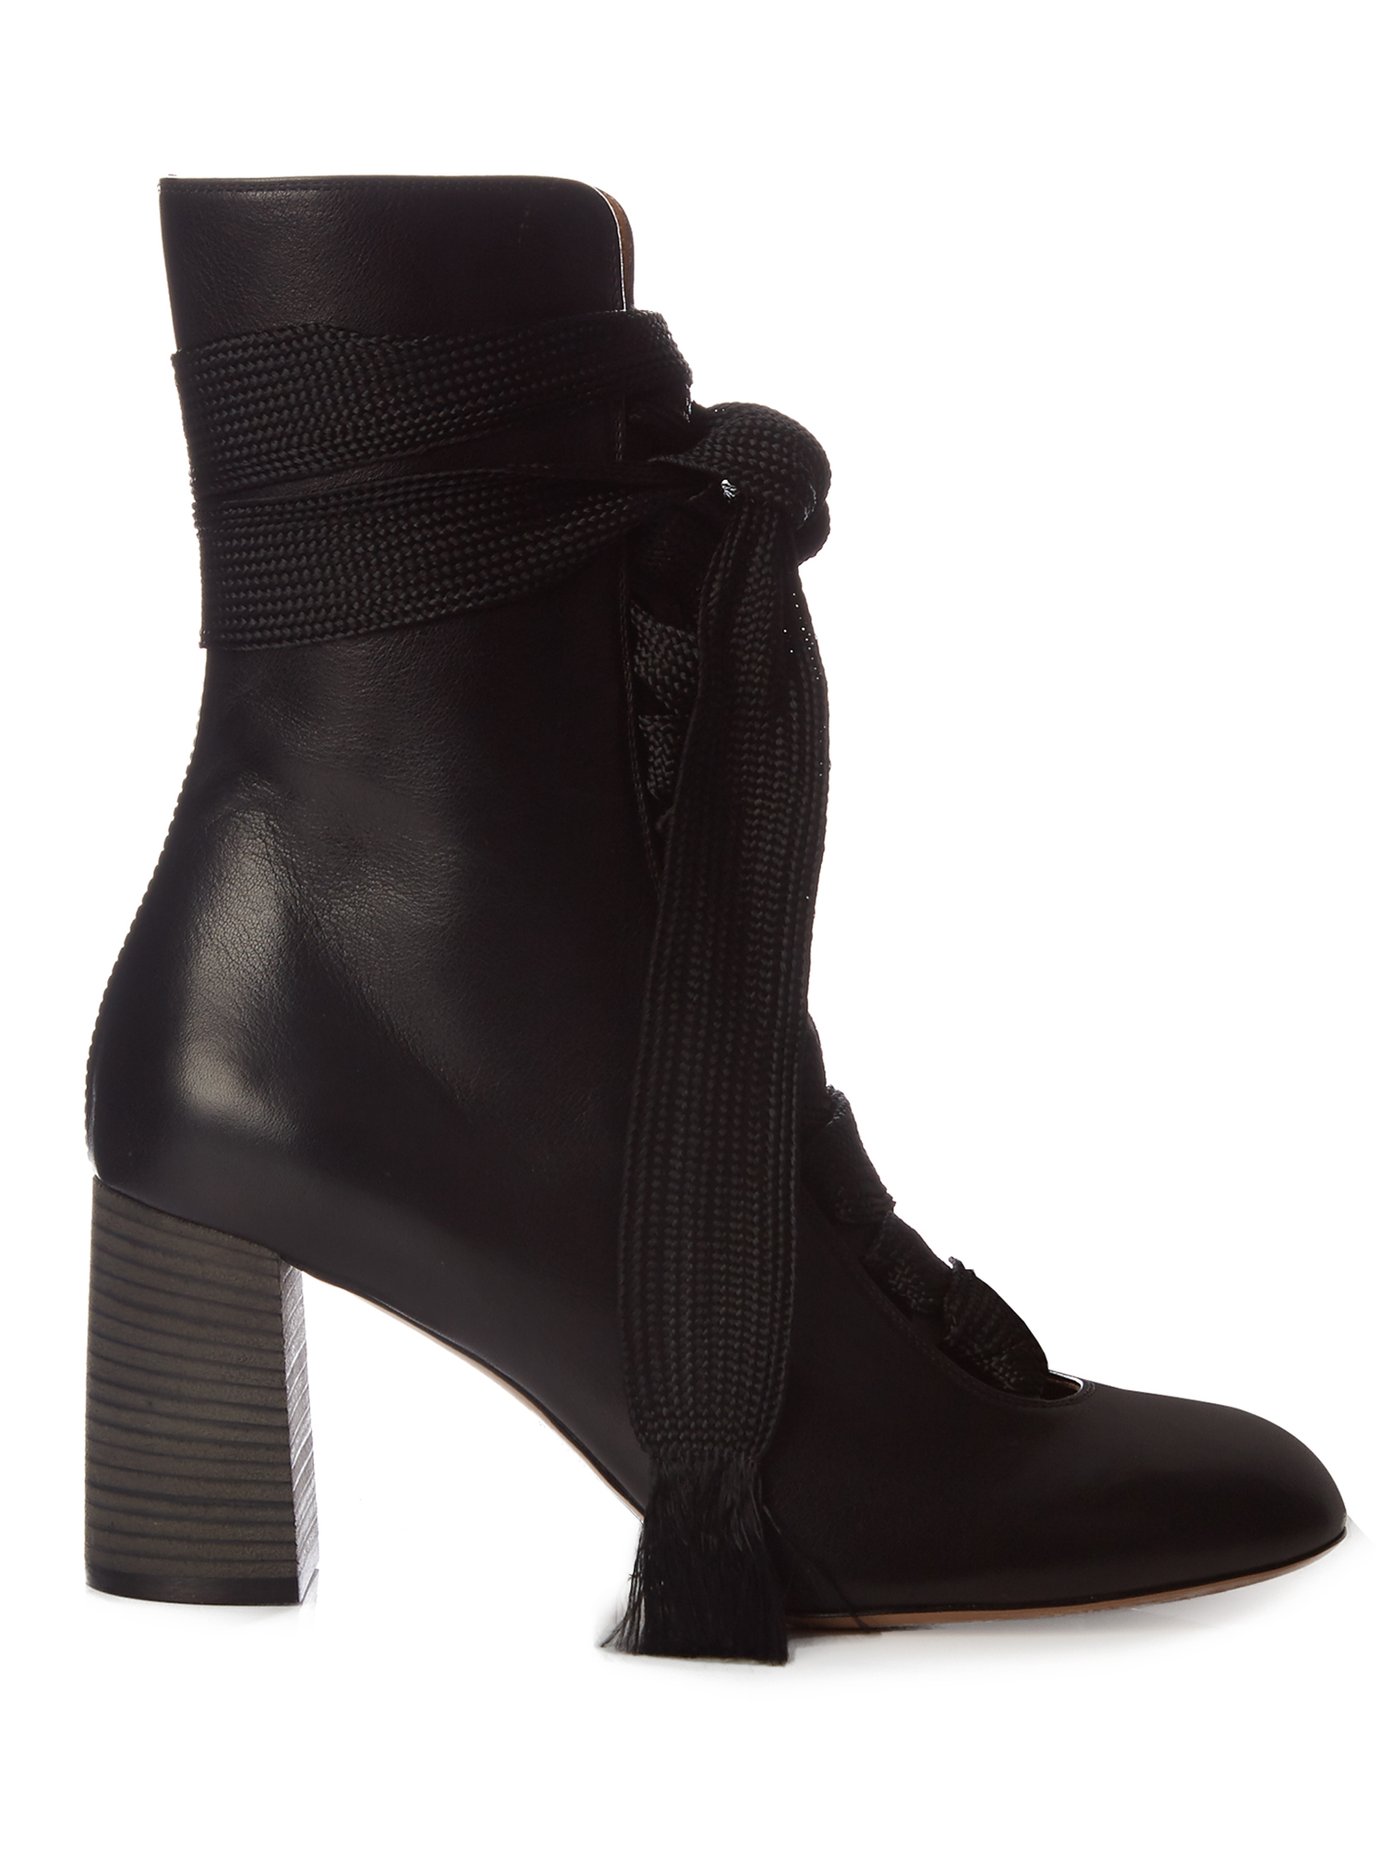 chloe harper lace up boots